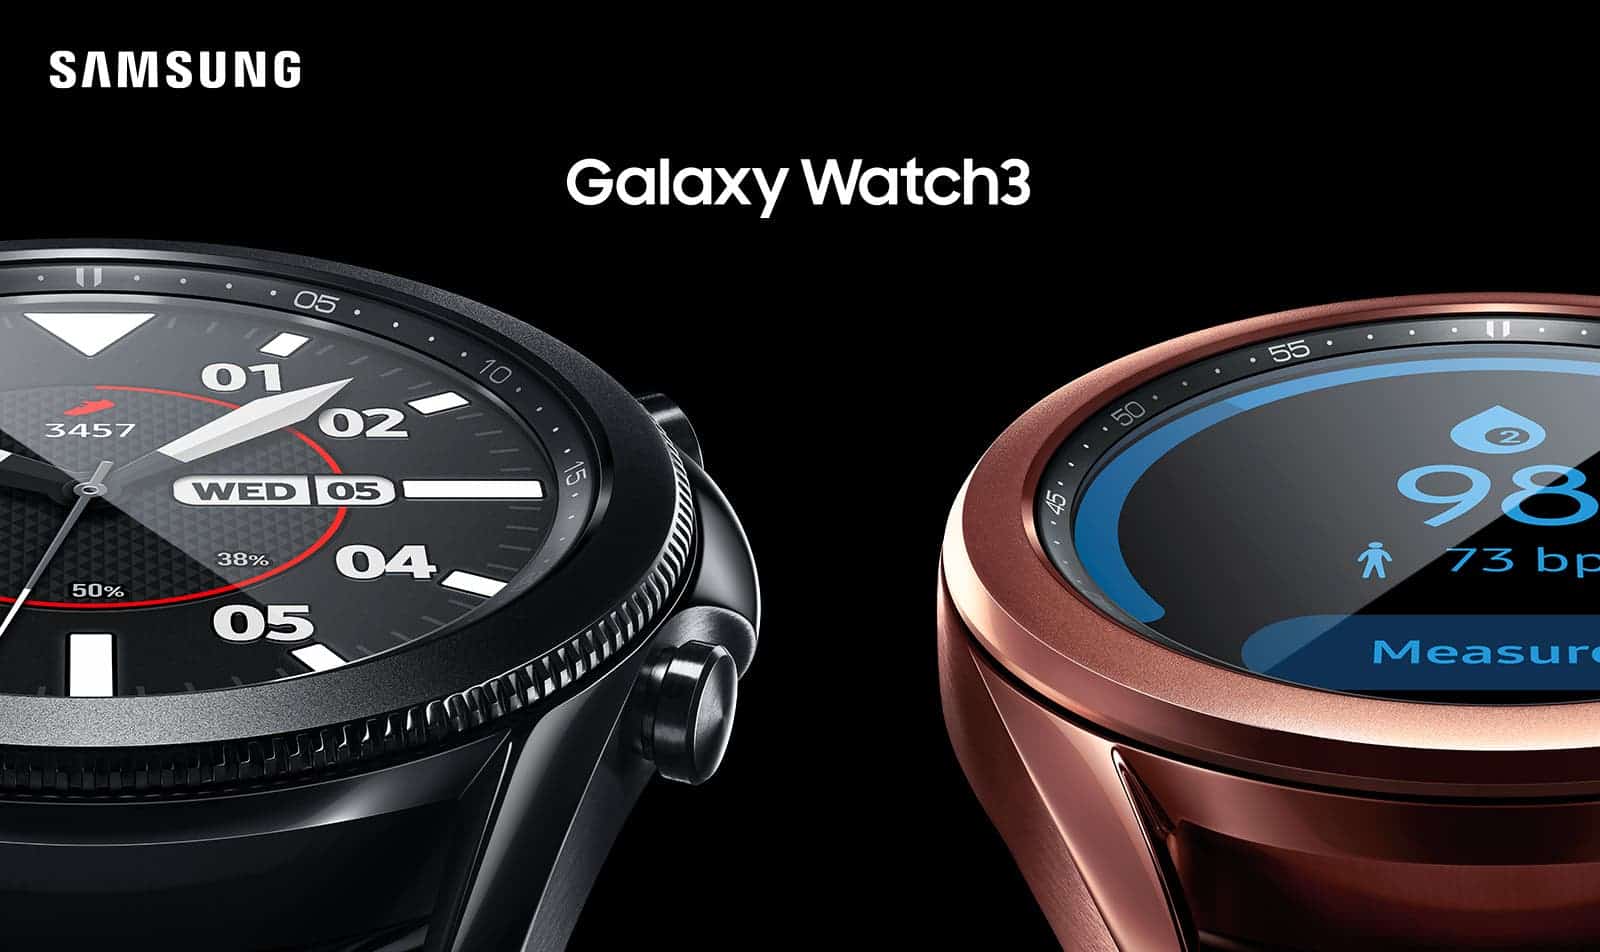 Samsung Galaxy Watch 3 updated with ECG Monitoring in the US